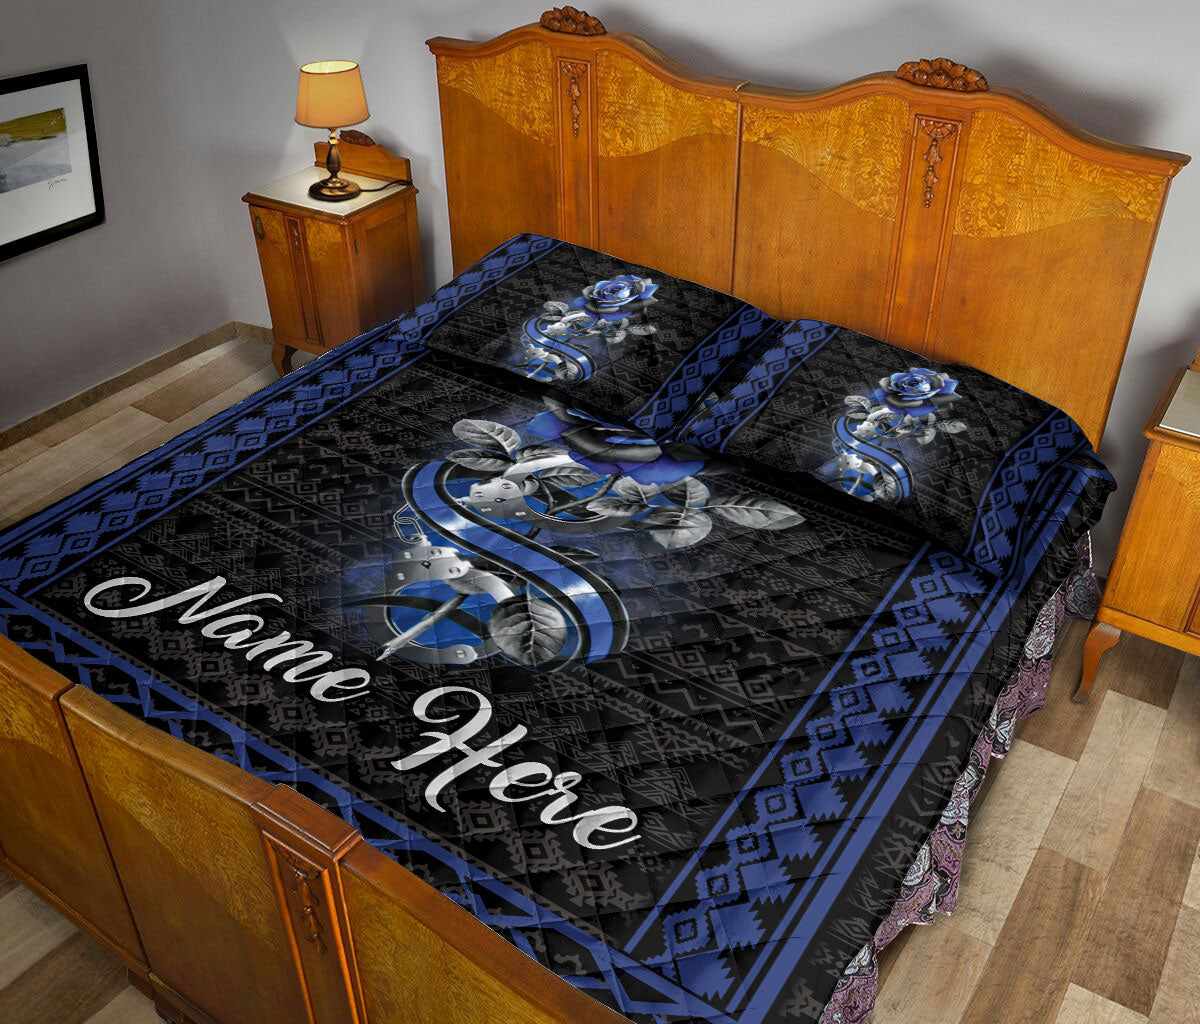 Ohaprints-Quilt-Bed-Set-Pillowcase-Police-Thin-Blue-Line-Rose-Floral-Boho-Pattern-Custom-Personalized-Name-Blanket-Bedspread-Bedding-211-Queen (80'' x 90'')